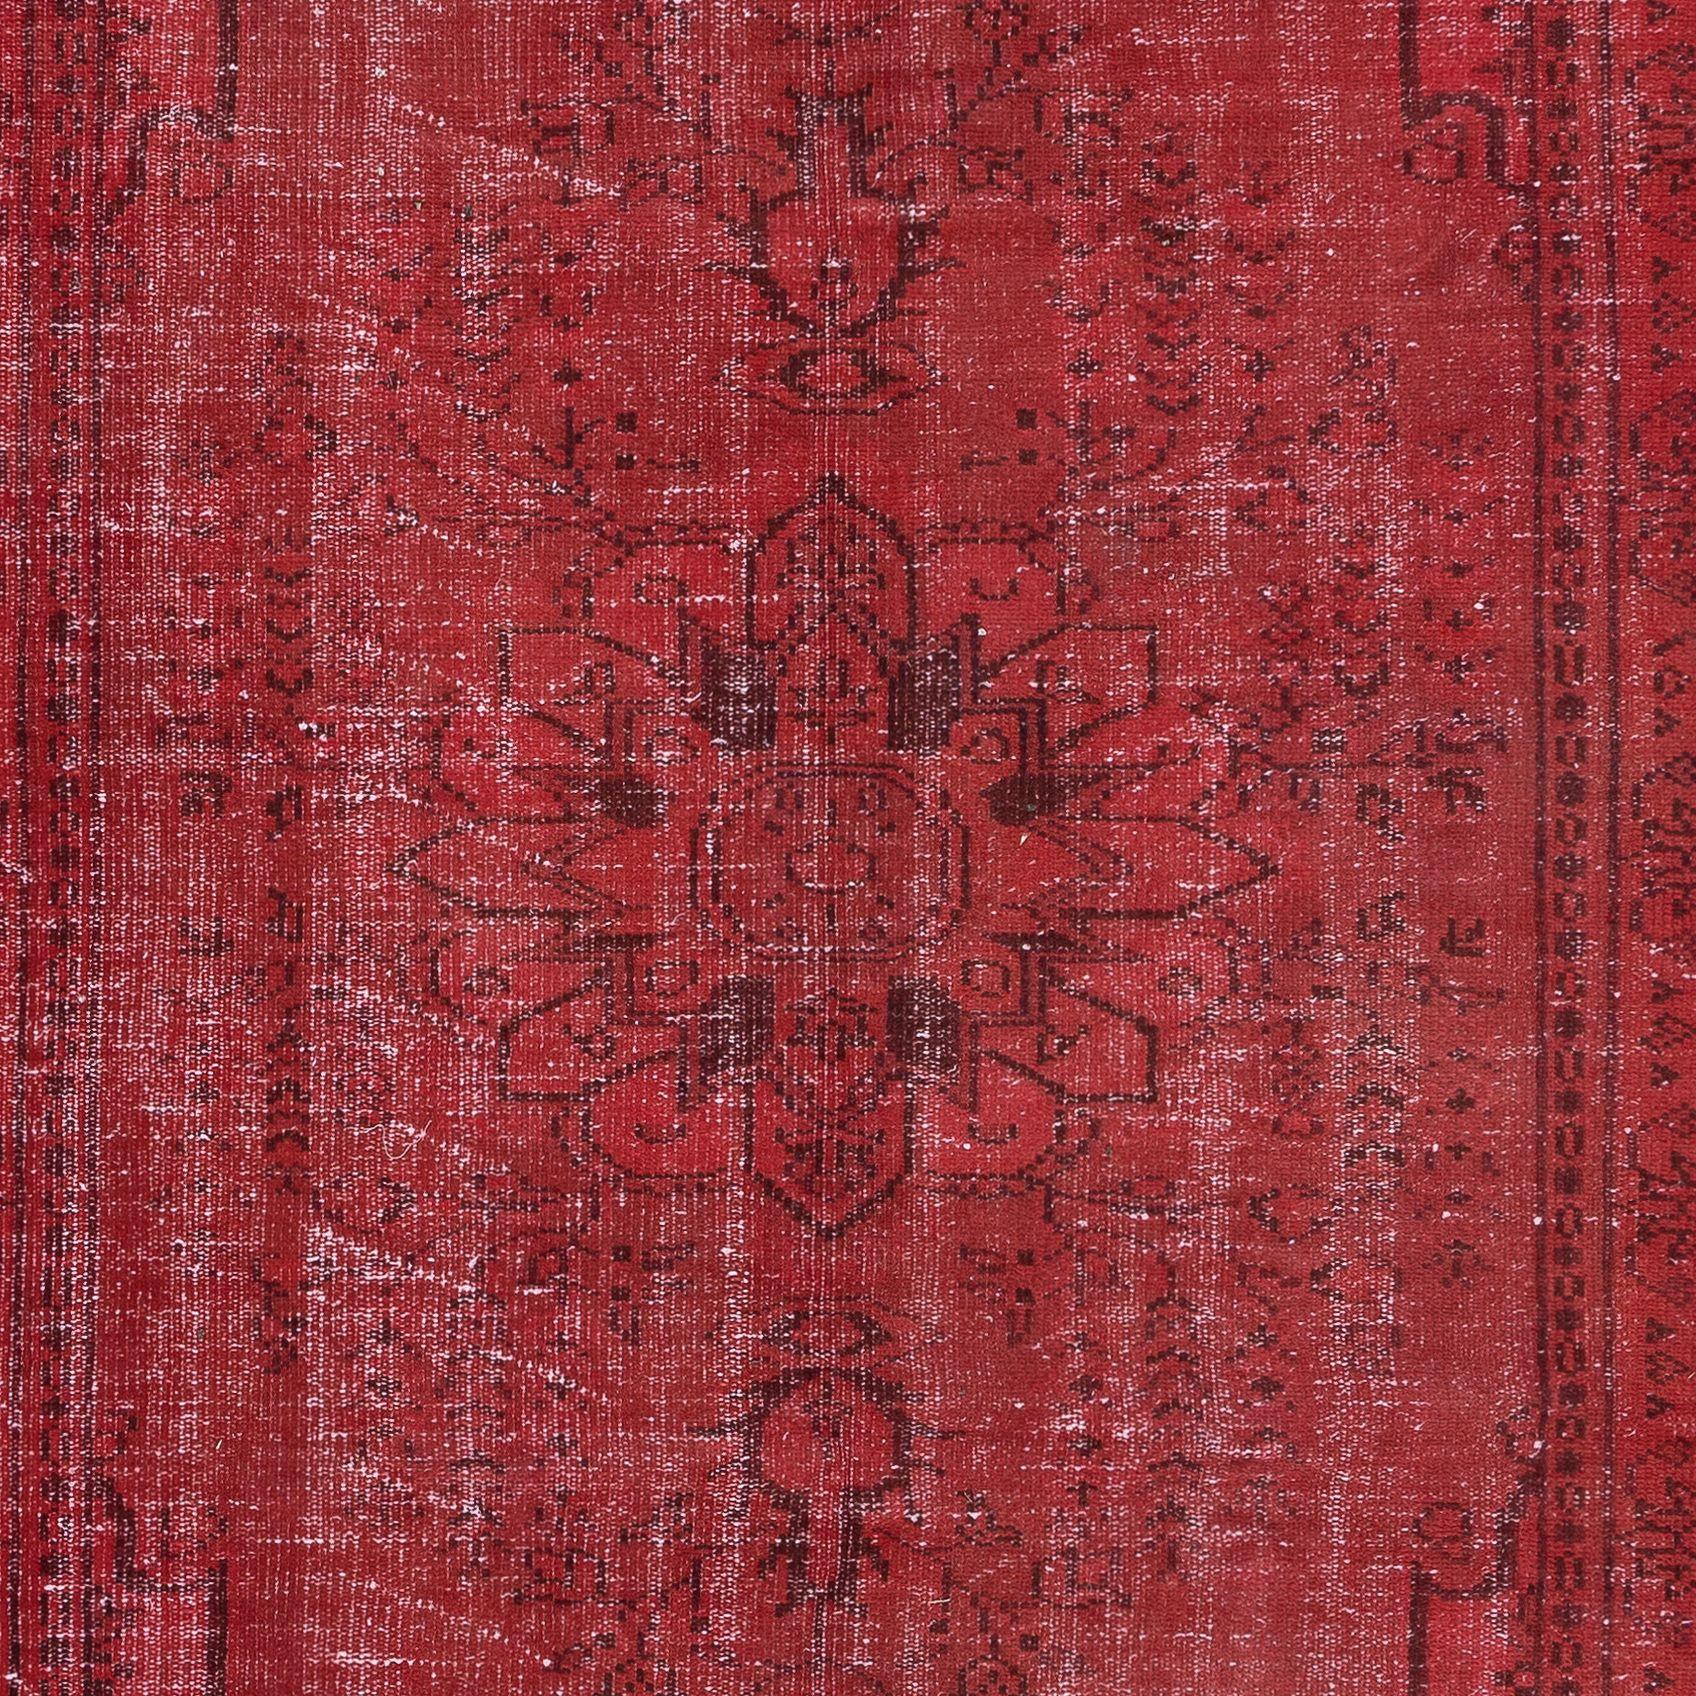 Hand-Knotted 5x8.3 Ft Red Handmade Room Size Rug, Wool and Cotton Carpet from Turkey For Sale